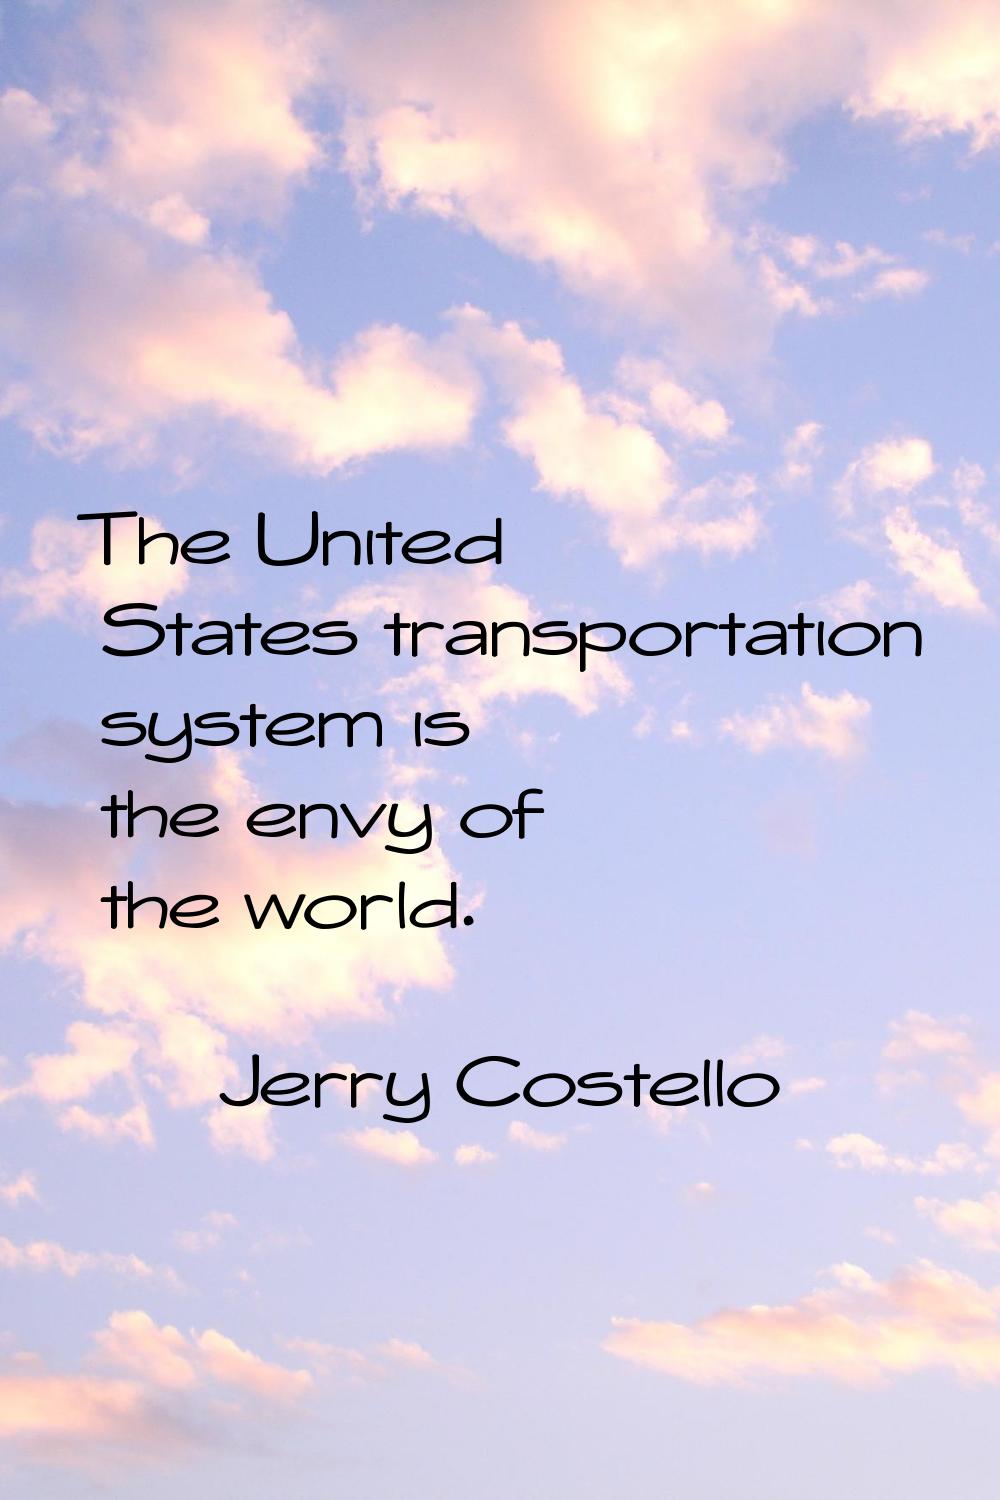 The United States transportation system is the envy of the world.